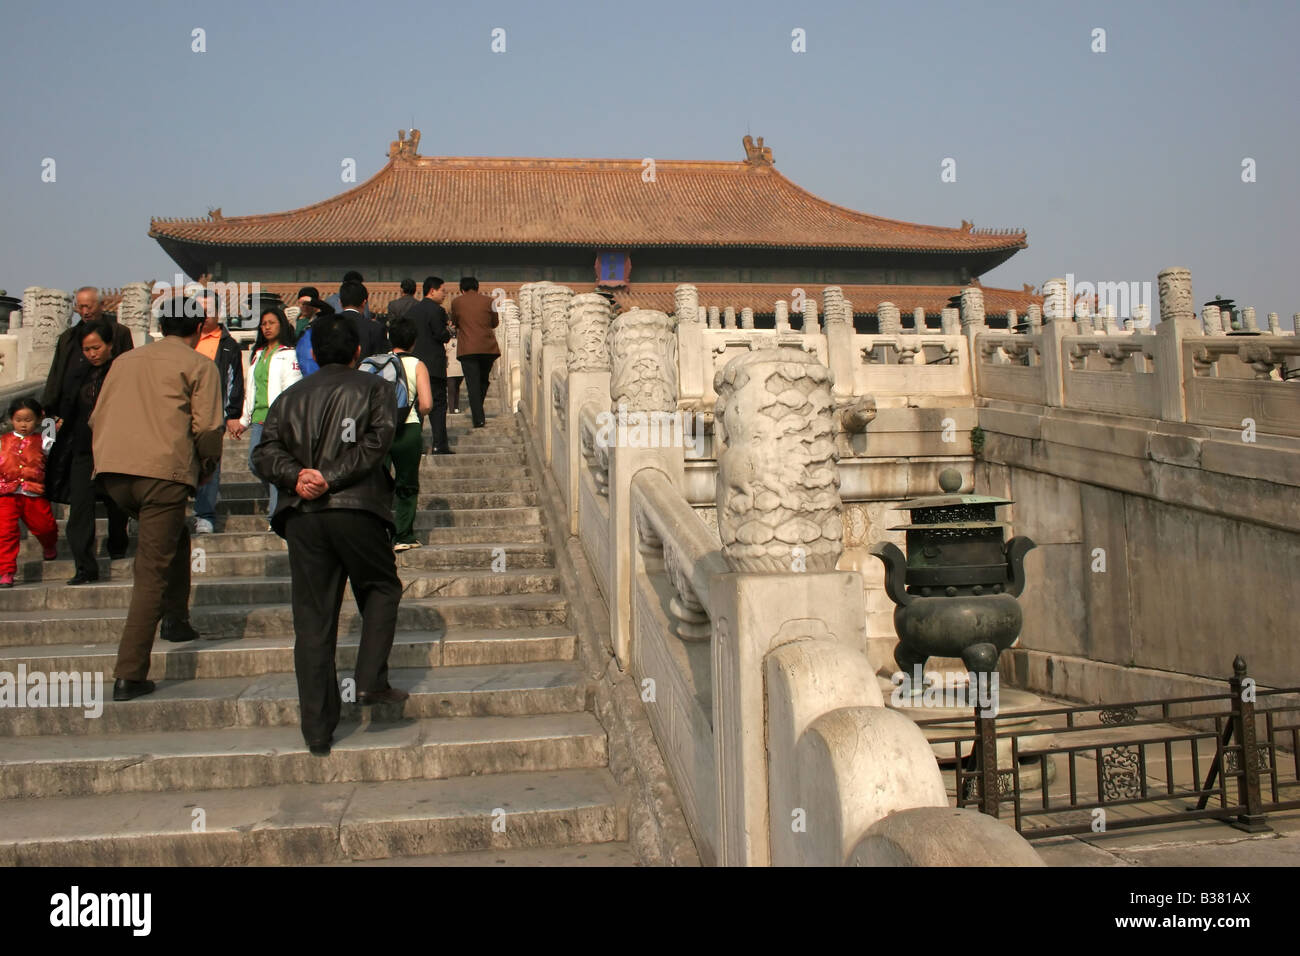 Tourists climb the stairs towards the Hall of Supreme Harmony, The Forbidden City, Beijing, China Stock Photo